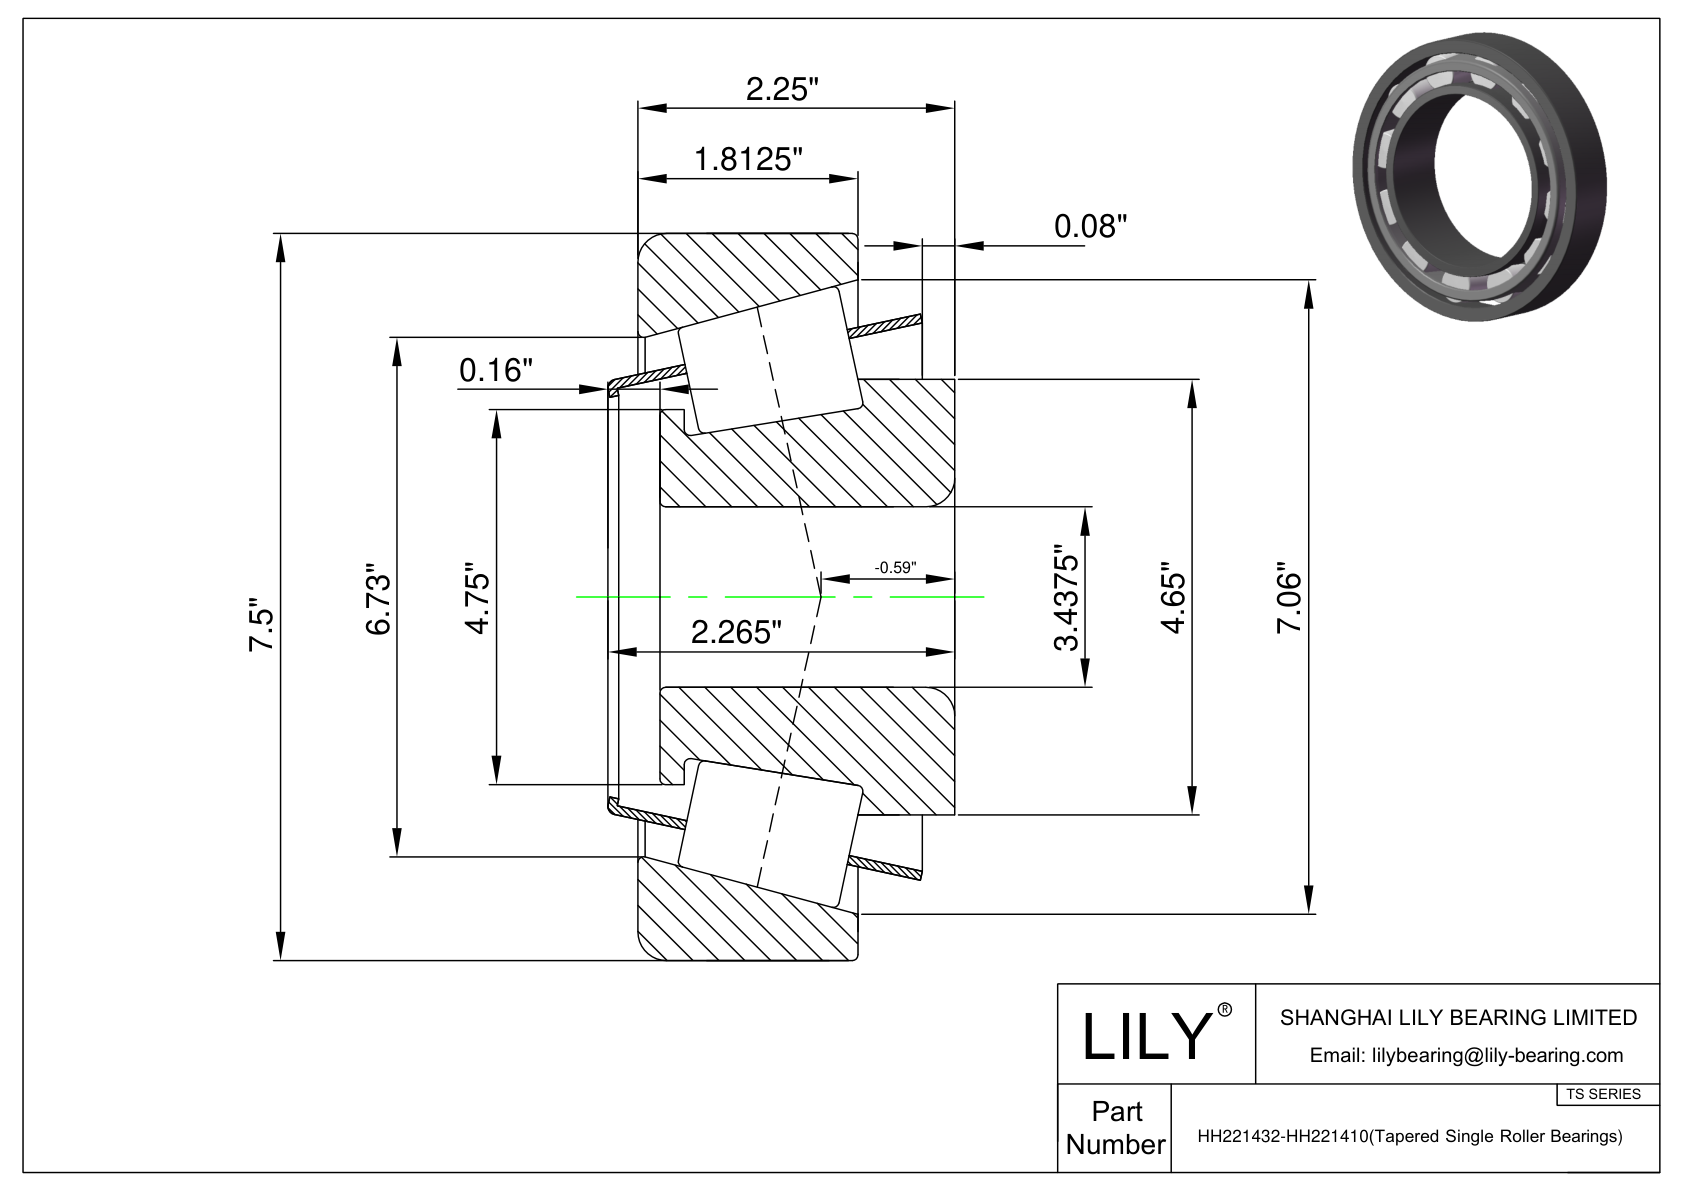 HH221432-HH221410 TS (Tapered Single Roller Bearings) (Imperial) cad drawing